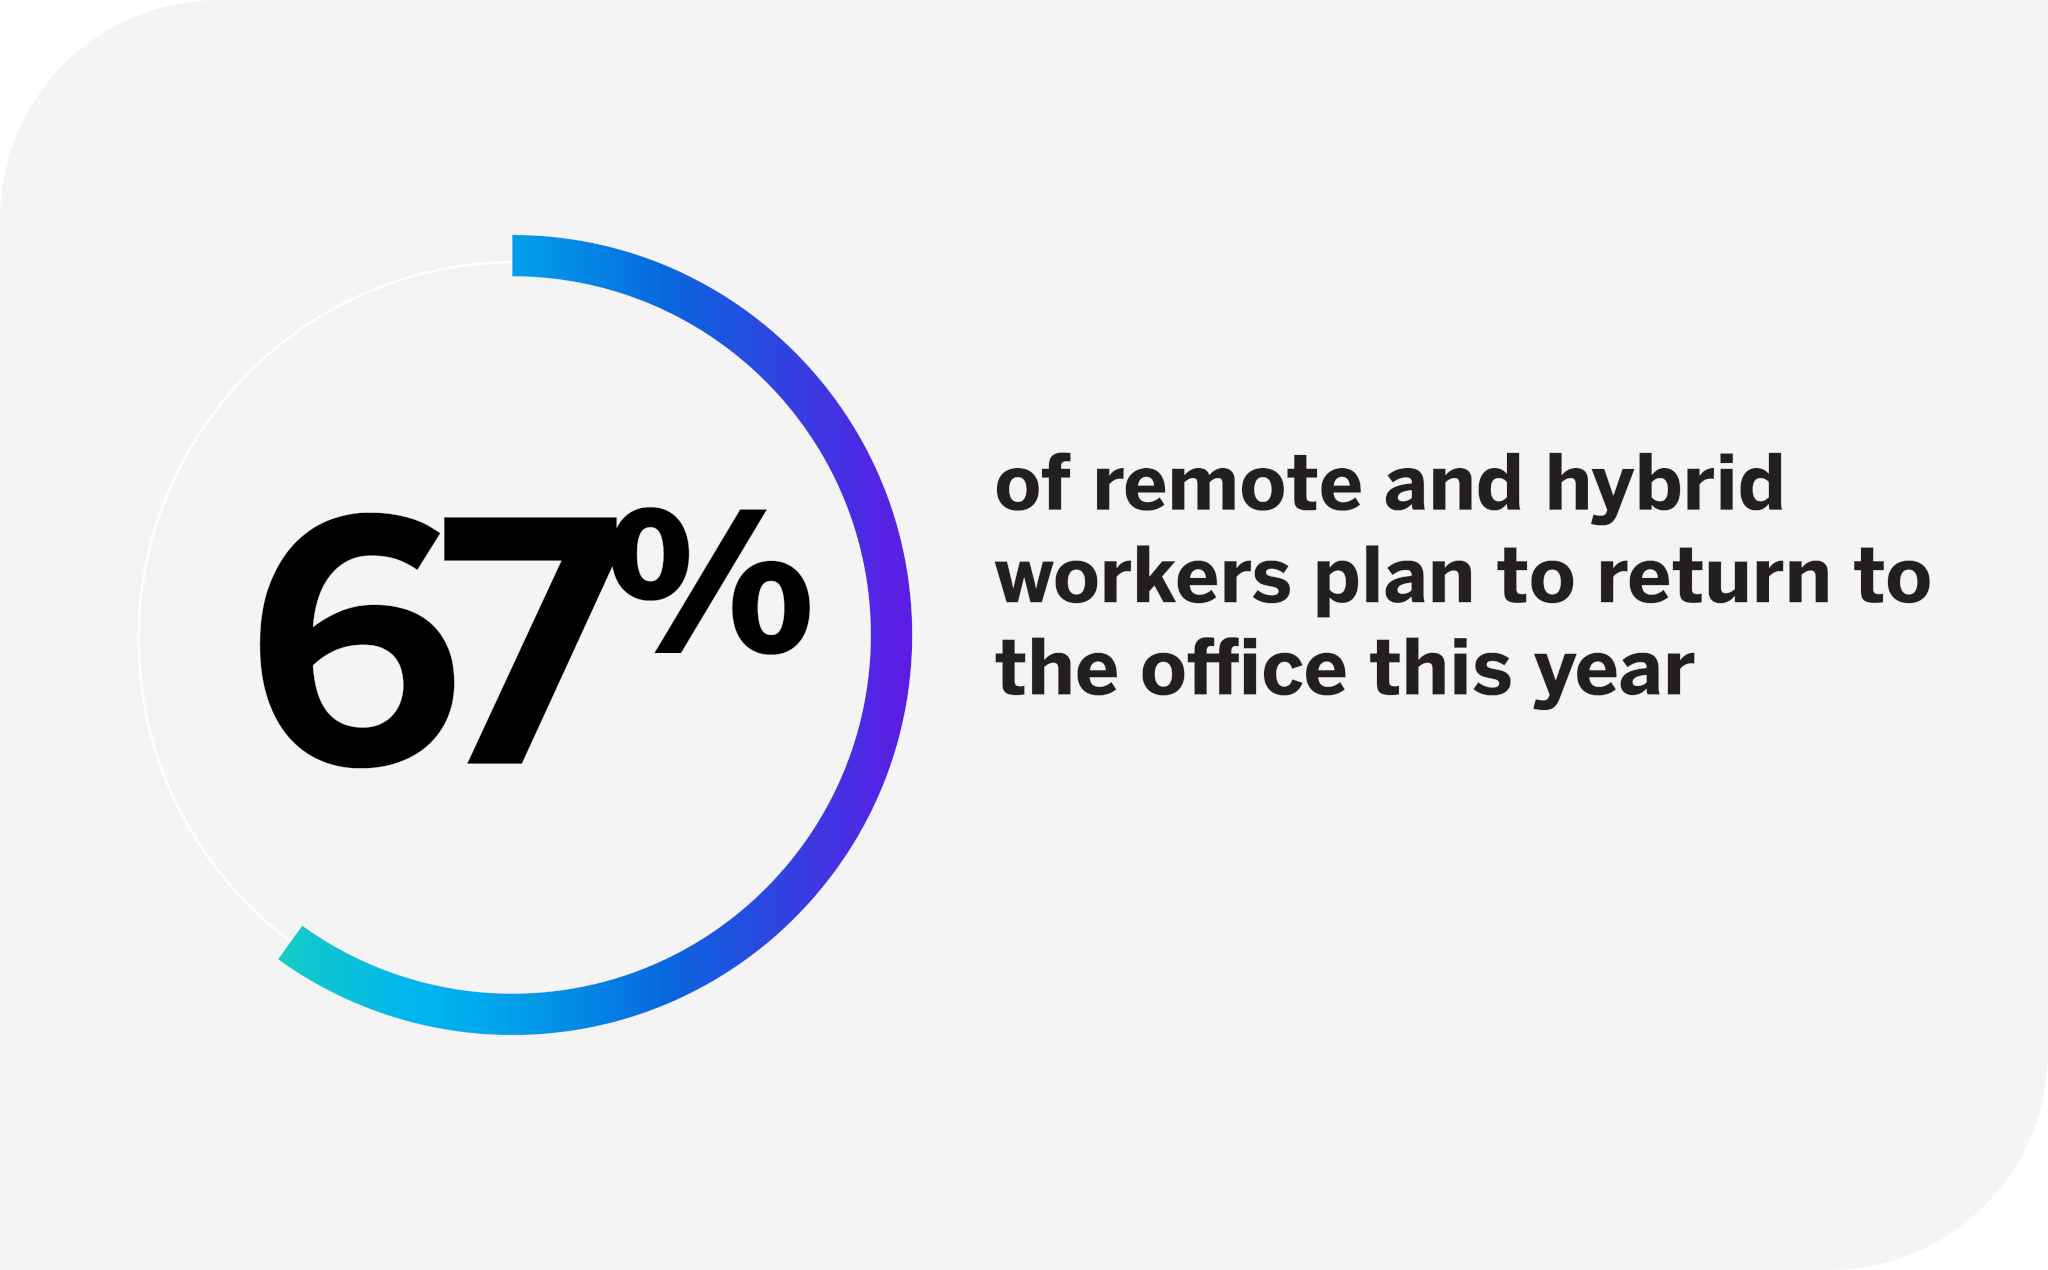 Statistic about remote workers